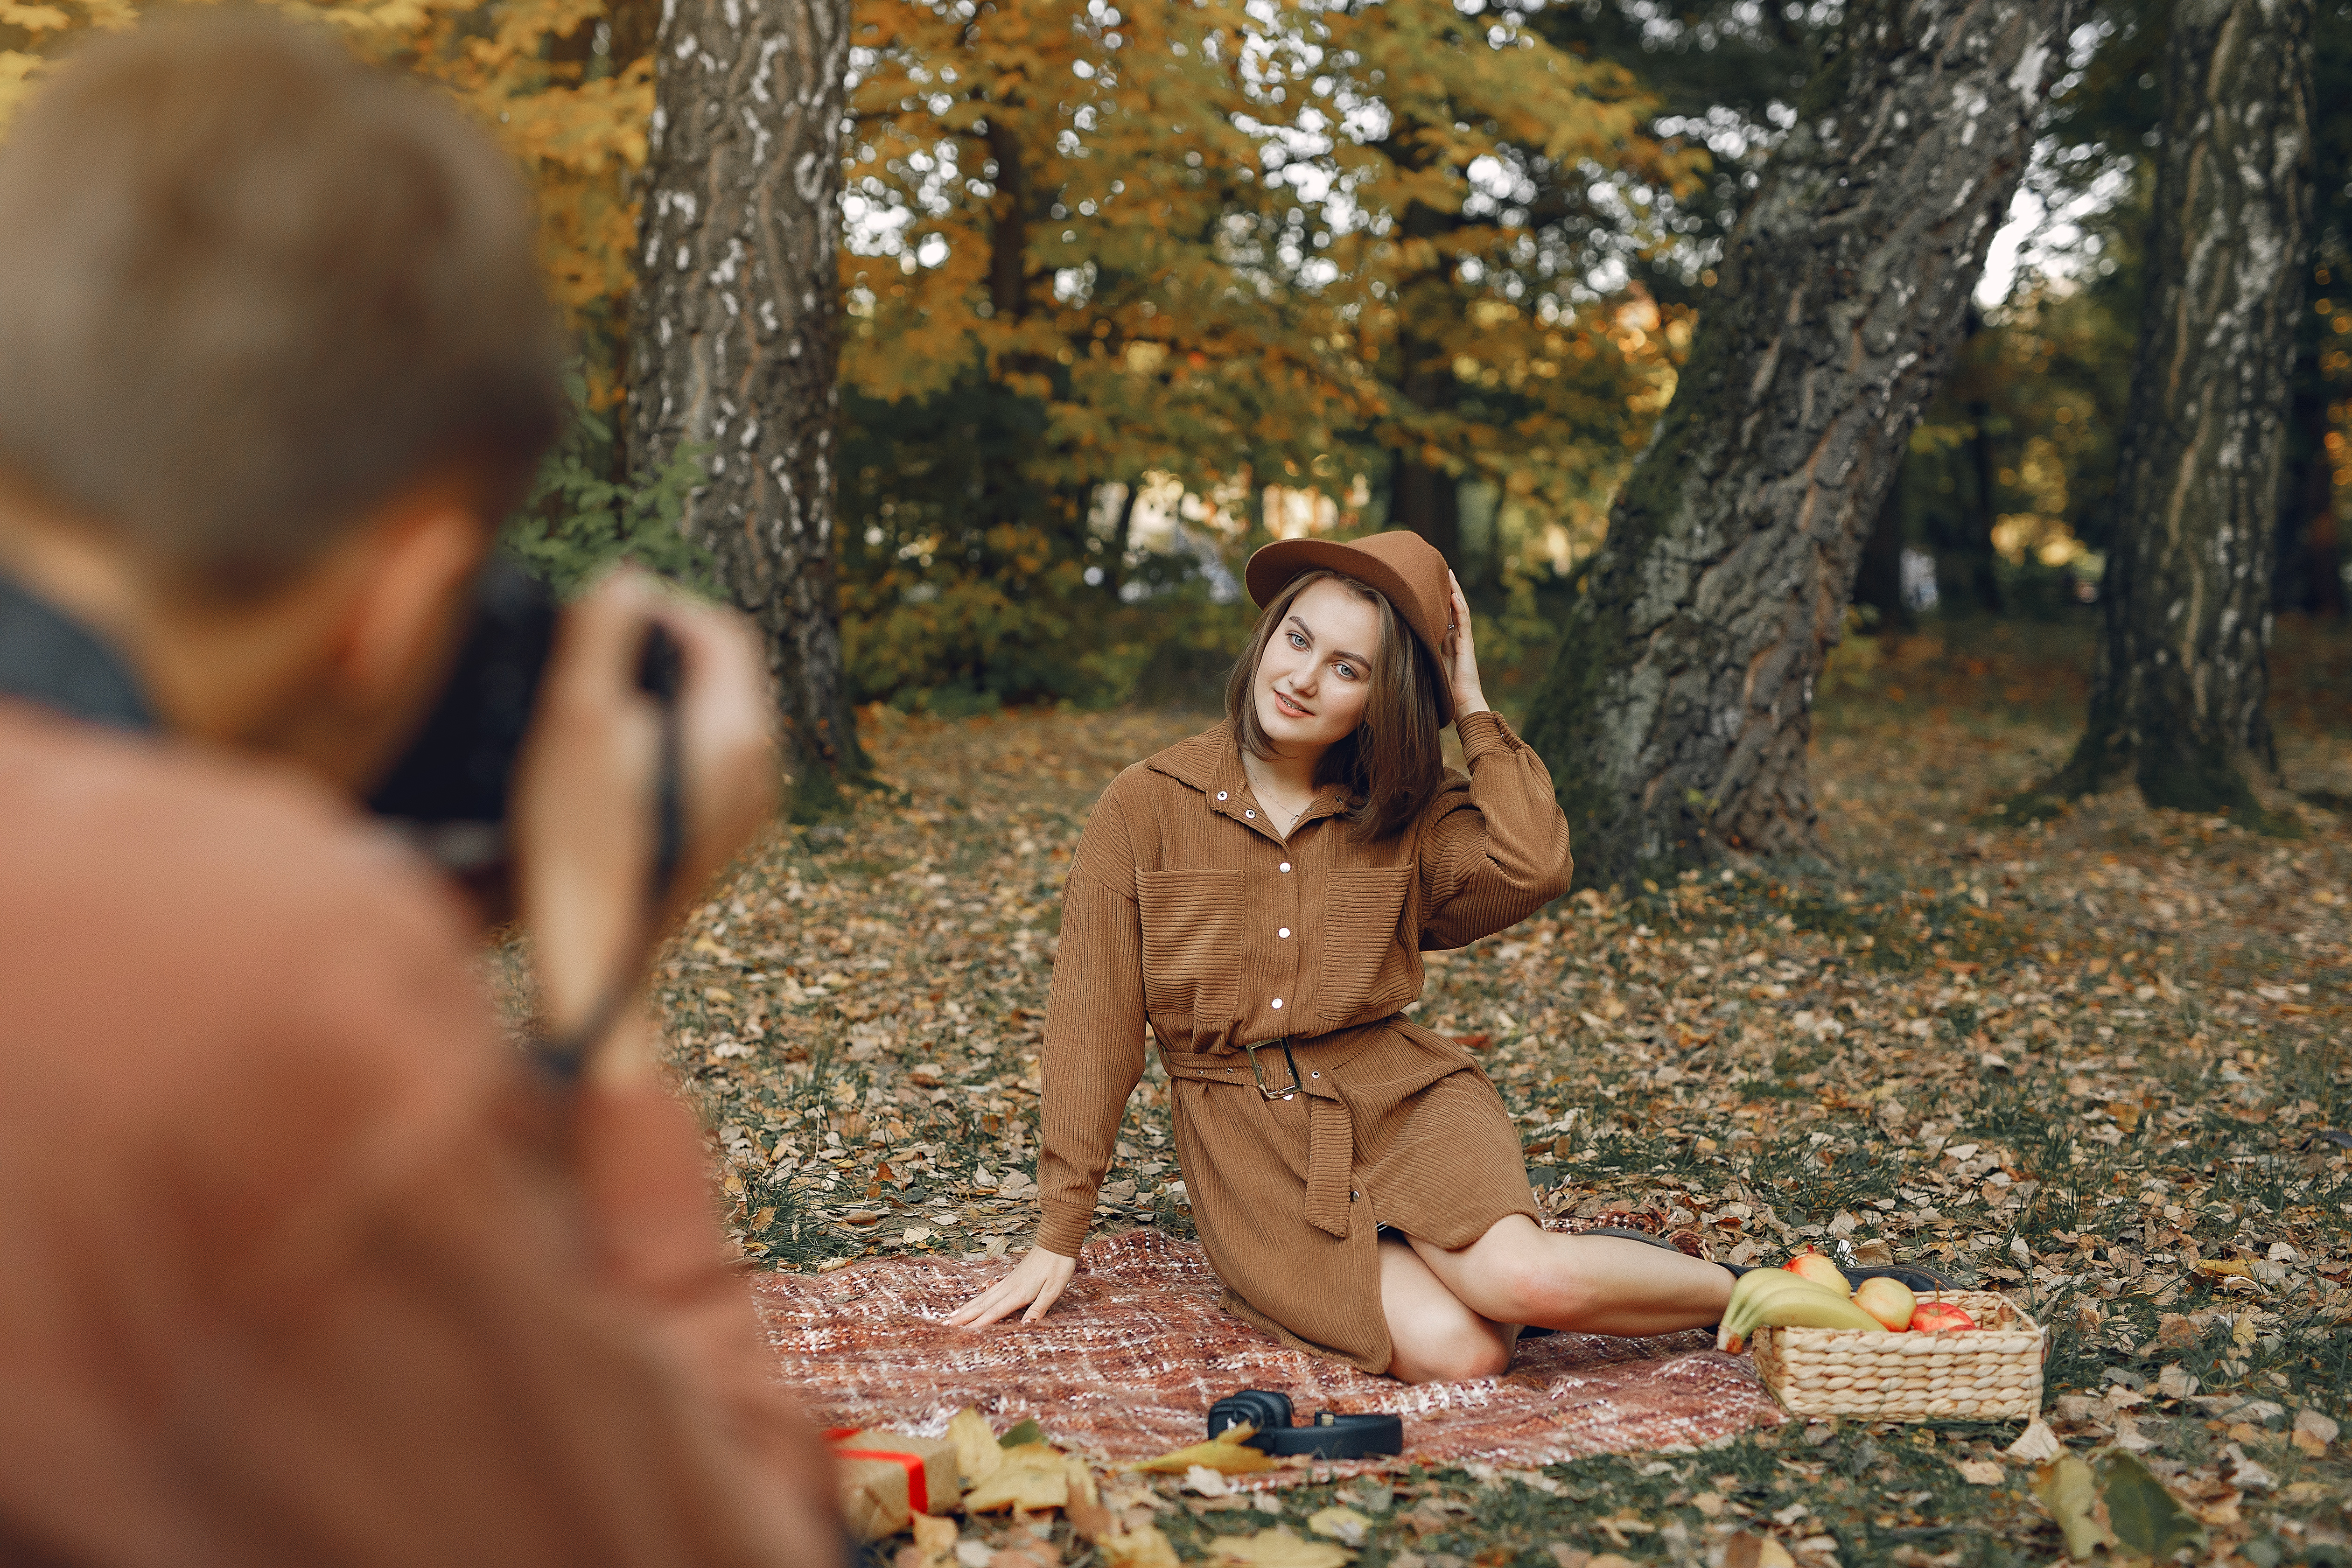 Autumn Photography Tips: Capturing the Beauty of Fall